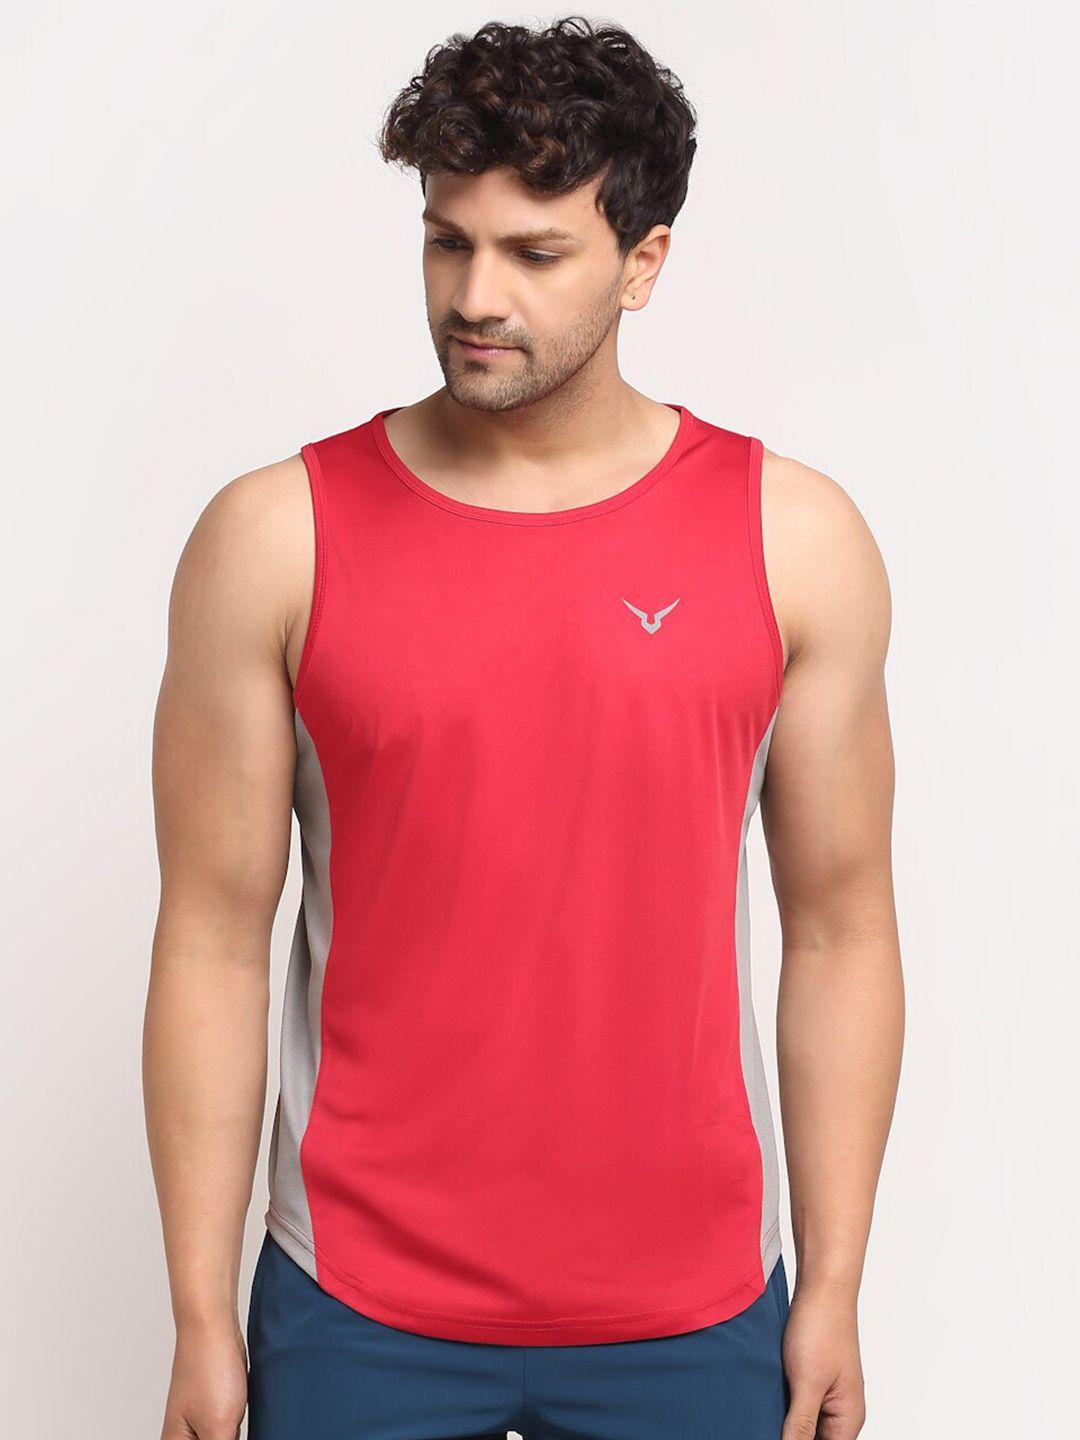 invincible men red & grey colourblocked slim fit training or gym t-shirt